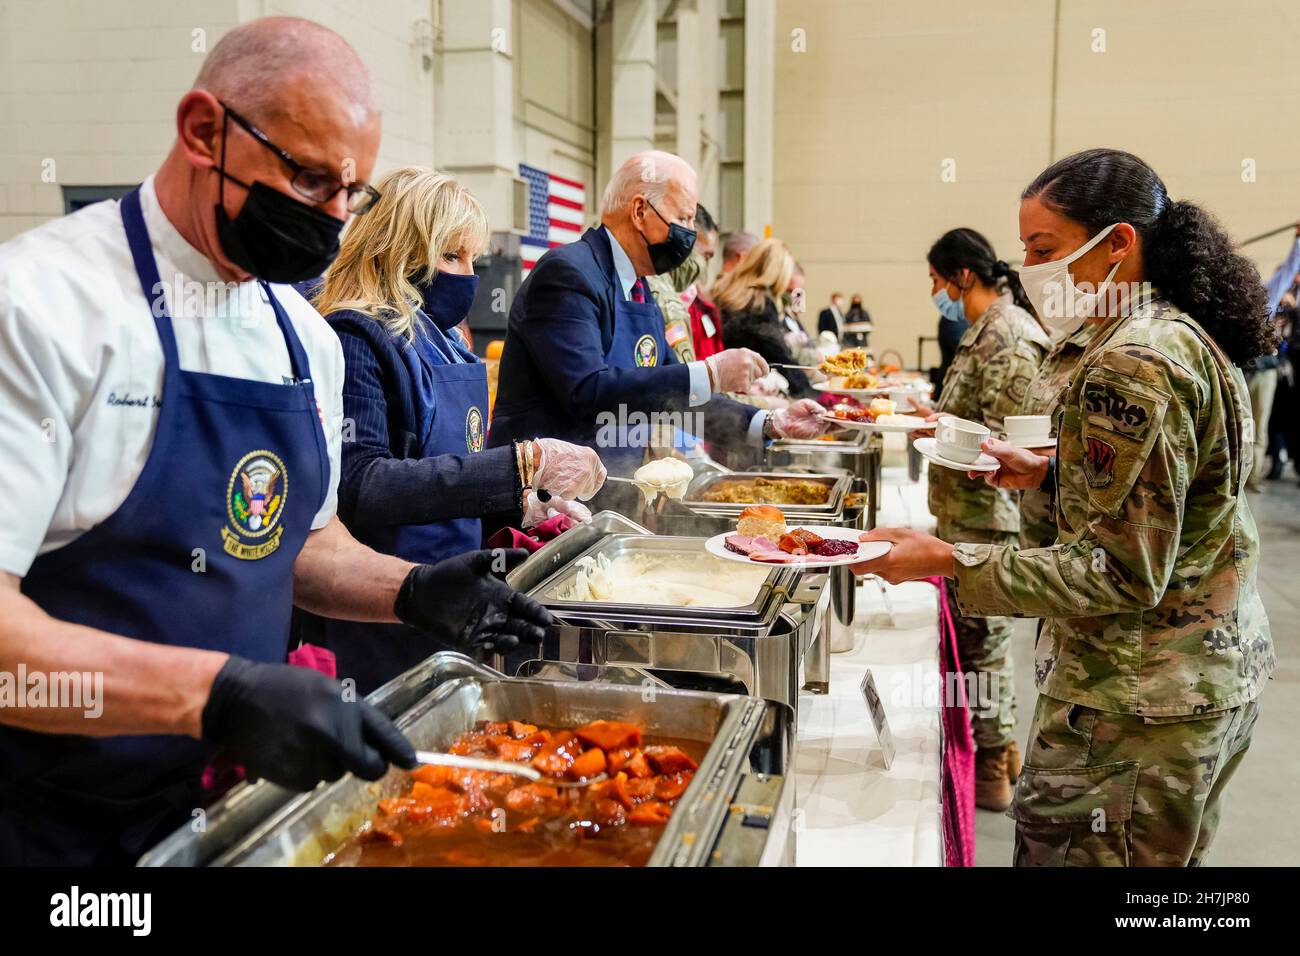 Fort Bragg, United States of America. 23 November, 2021. U.S President Joe Biden and First Lady Jill Biden serve turkey dinner to celebrate an early Thanksgiving with service members at Fort Bragg November 22, 2021, in Fort Bragg, North Carolina. Credit: Adam Schultz/White House Photo/Alamy Live News Stock Photo